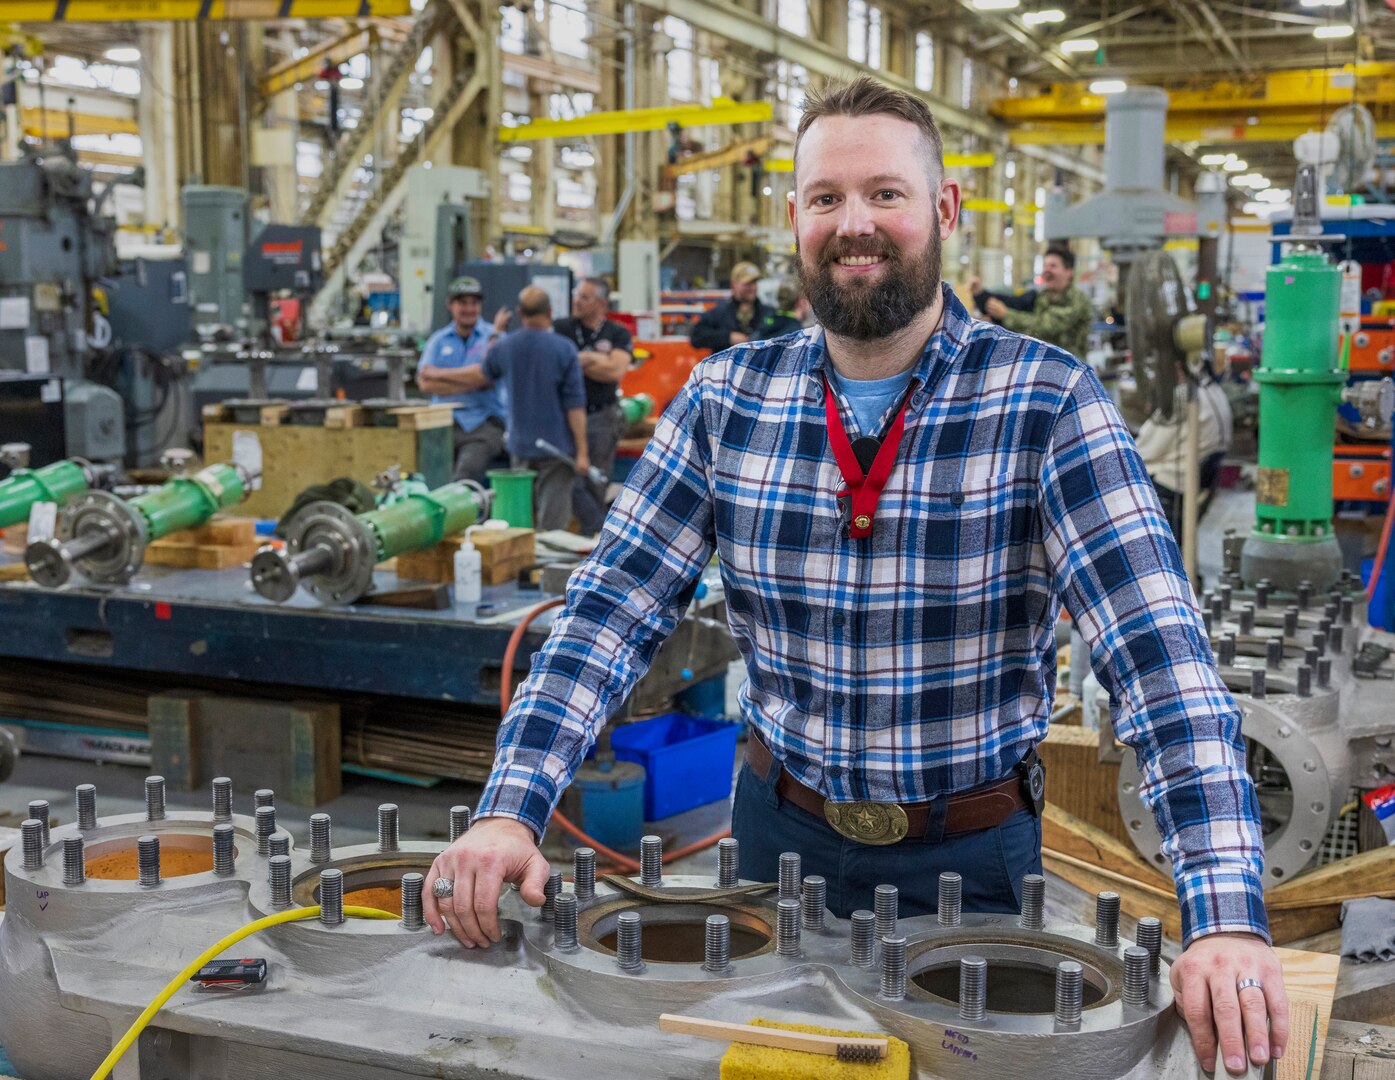 Britton Cox, mechanical engineer, Code 260M, Inside Machine Shop Engineering & Planning, poses for a portrait in Building 431 at Puget Sound Naval Shipyard & Intermediate
Maintenance Facility, in Bremerton, Washington. (U.S. Navy photo by Wendy Hallmark)